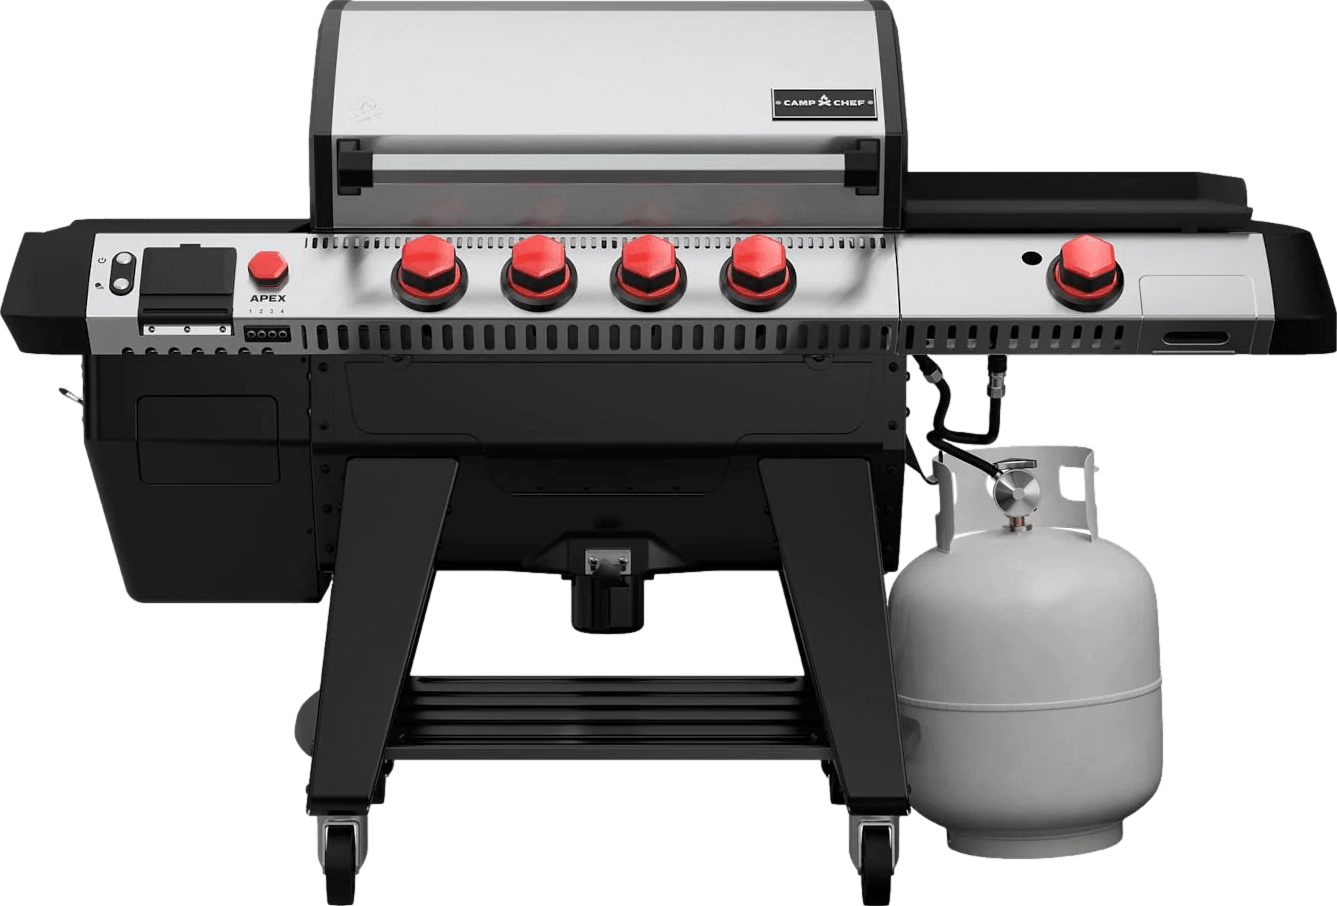 Camp Chef Apex Pellet Grill with Gas Kit and Sidekick · 24 in.